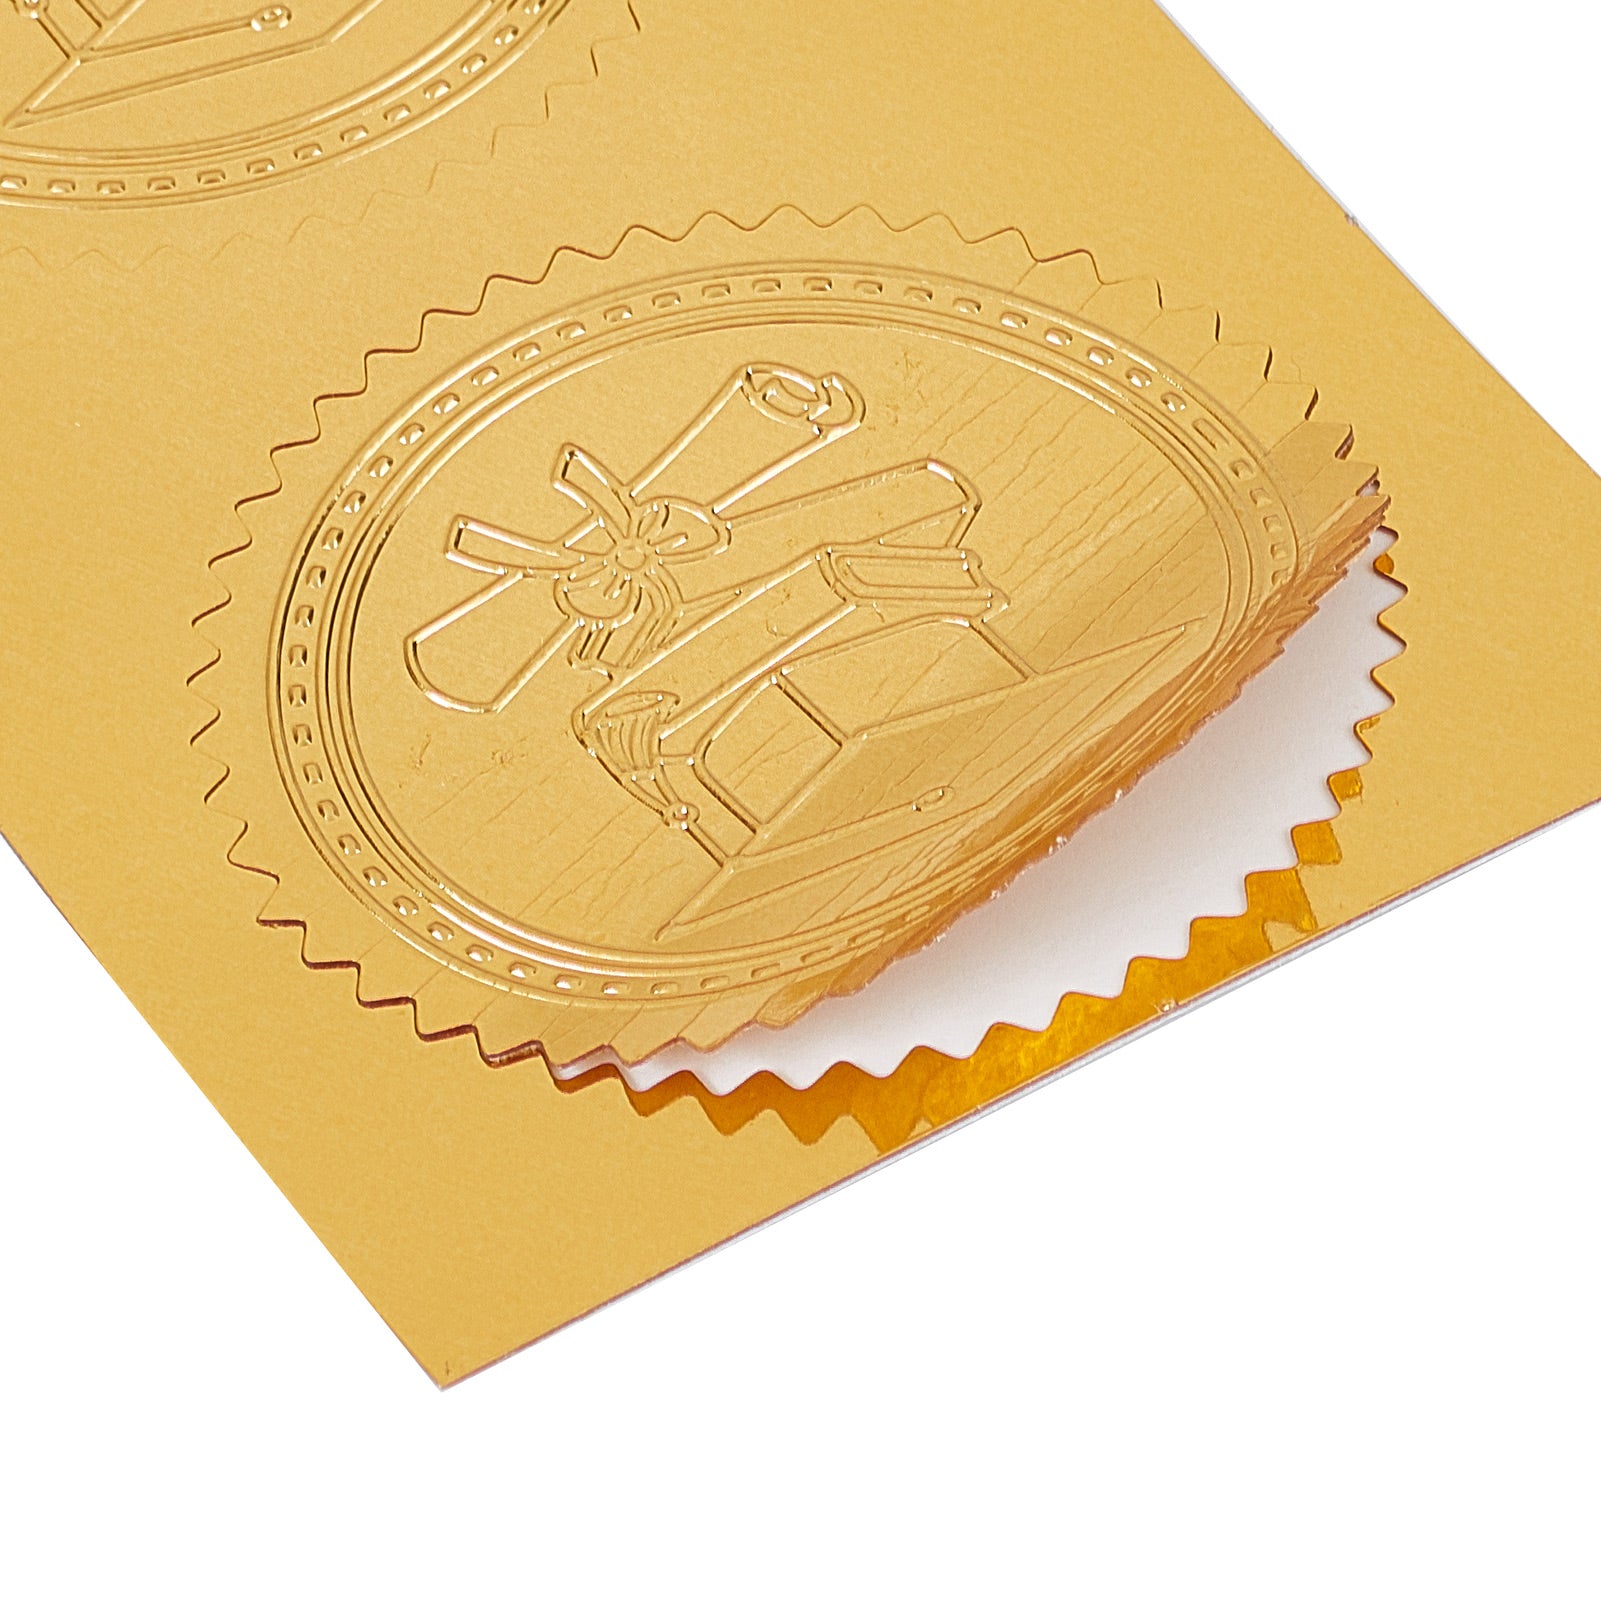  CRASPIRE 2 Gold Foil Sticker Lotus 100pcs Certificate Seals  Gold Embossed Round Embossed Foil Seal Stickers for Envelopes Invitation  Card Diplomas Awards Graduation Celebration : Office Products